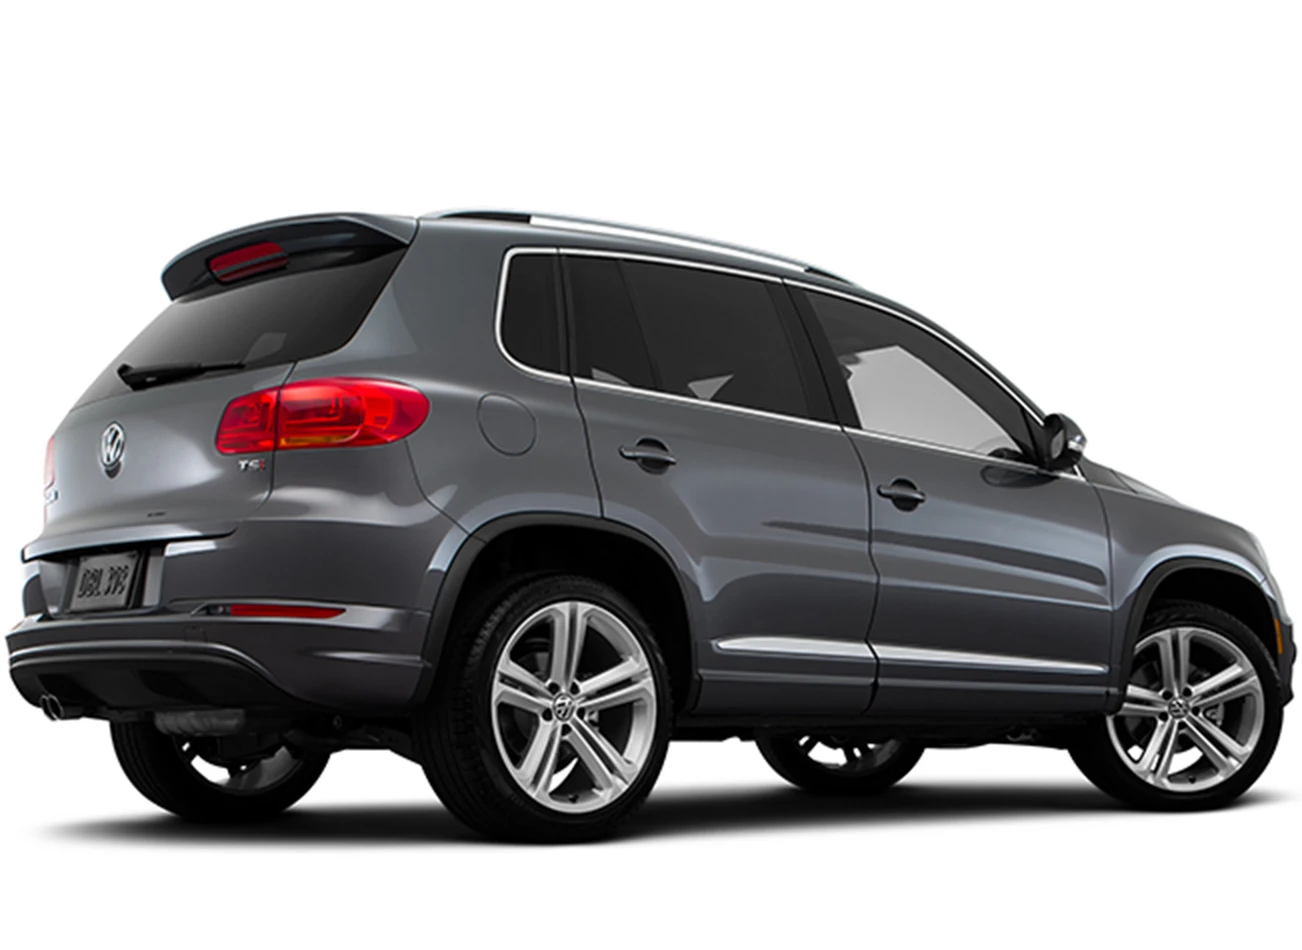 2016 Volkswagen Tiguan Research, photos, specs, and expertise